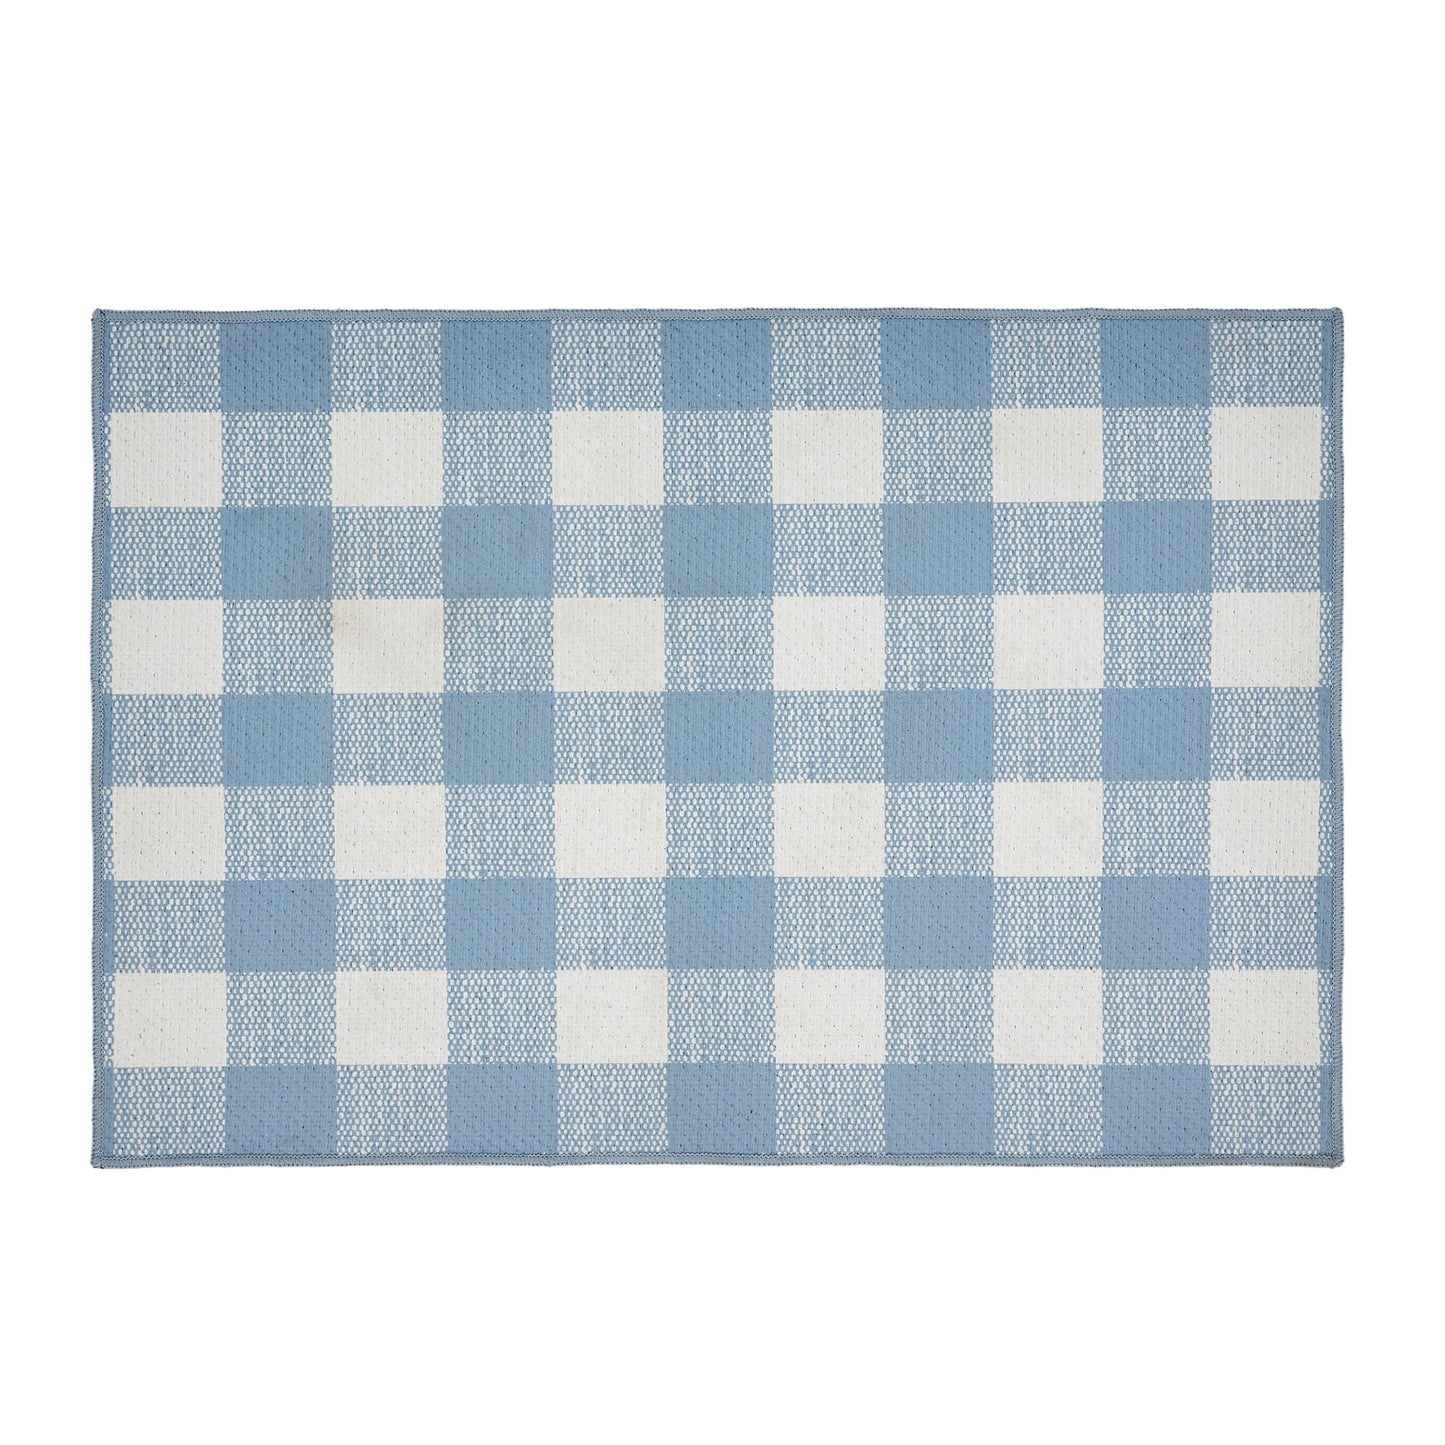 VHC Brands Annie Buffalo Check Blue Indoor/Outdoor Rug Rect 24x36, Polyester Area Rug, Accent Rug, Floor Decor, Annie Buffalo Check Collection, Rectangle 24x36, Dusk Blue